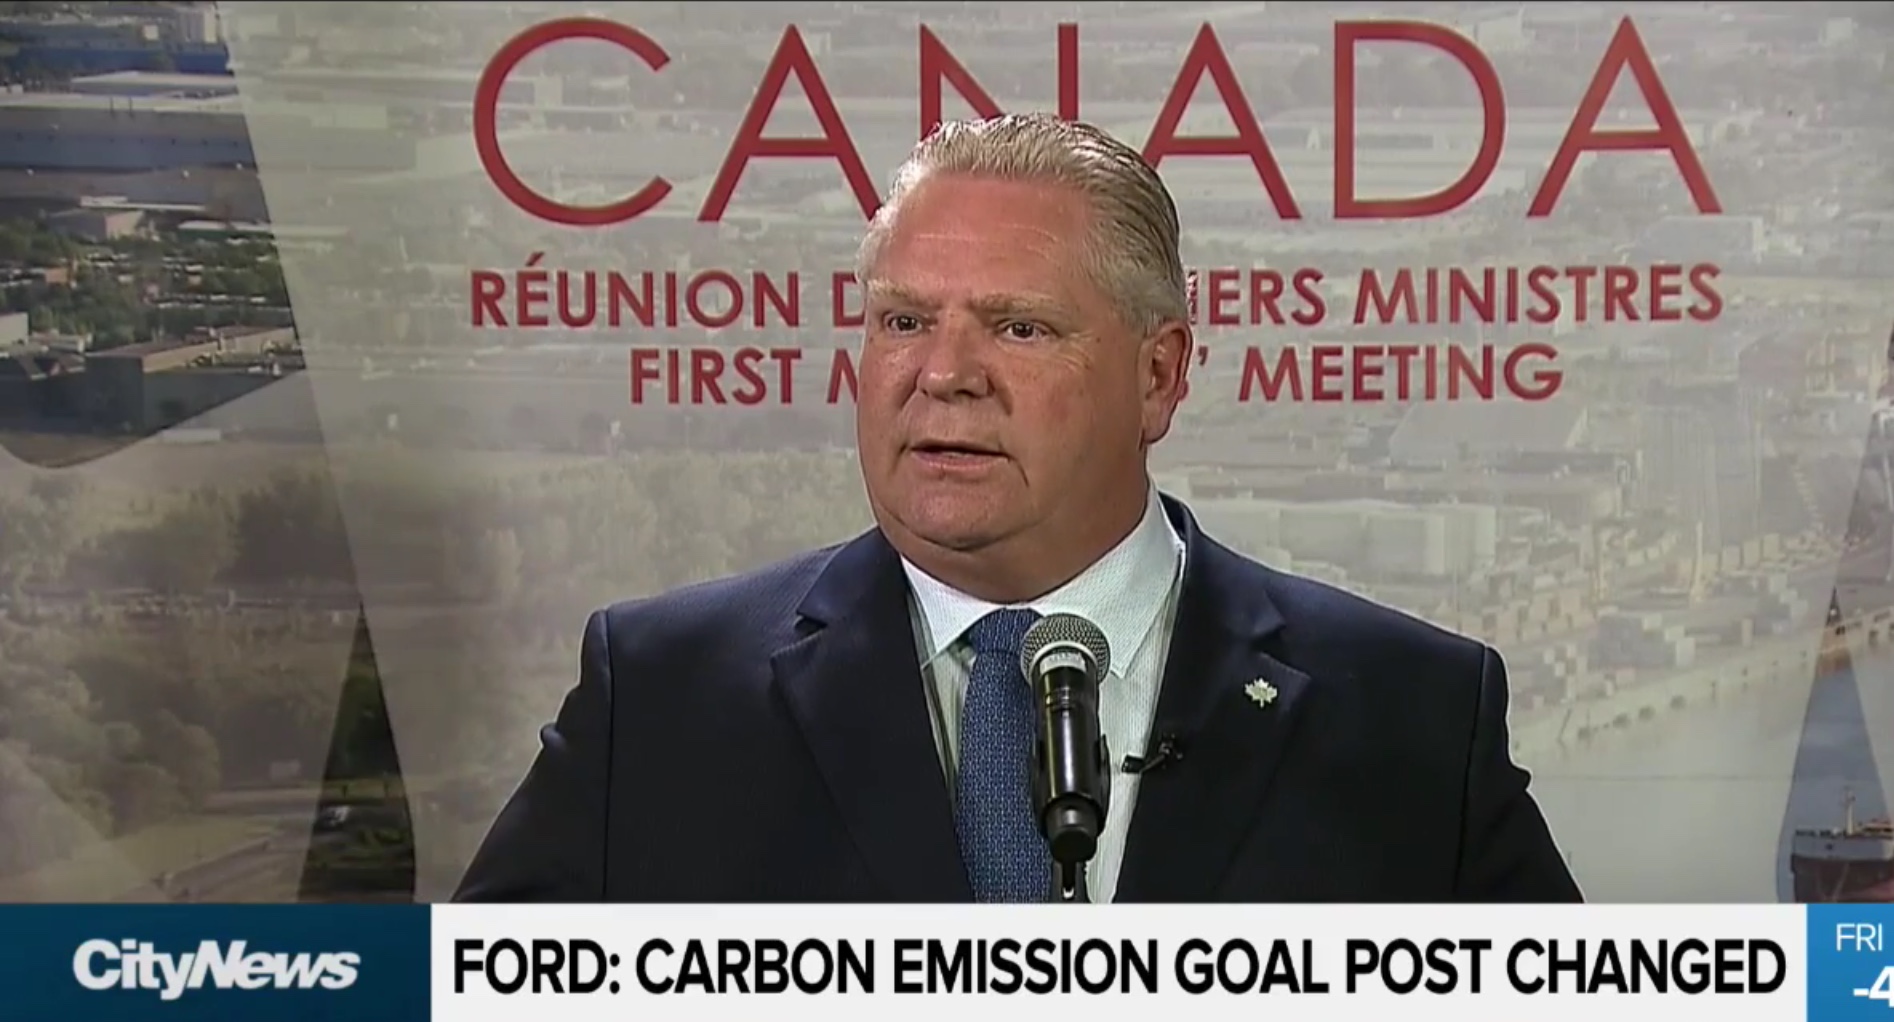 Ontario Premier Doug Ford speaks to the media following a First Minister’s Meeting in Montreal, Dec. 7, 2018. City News screenshot.